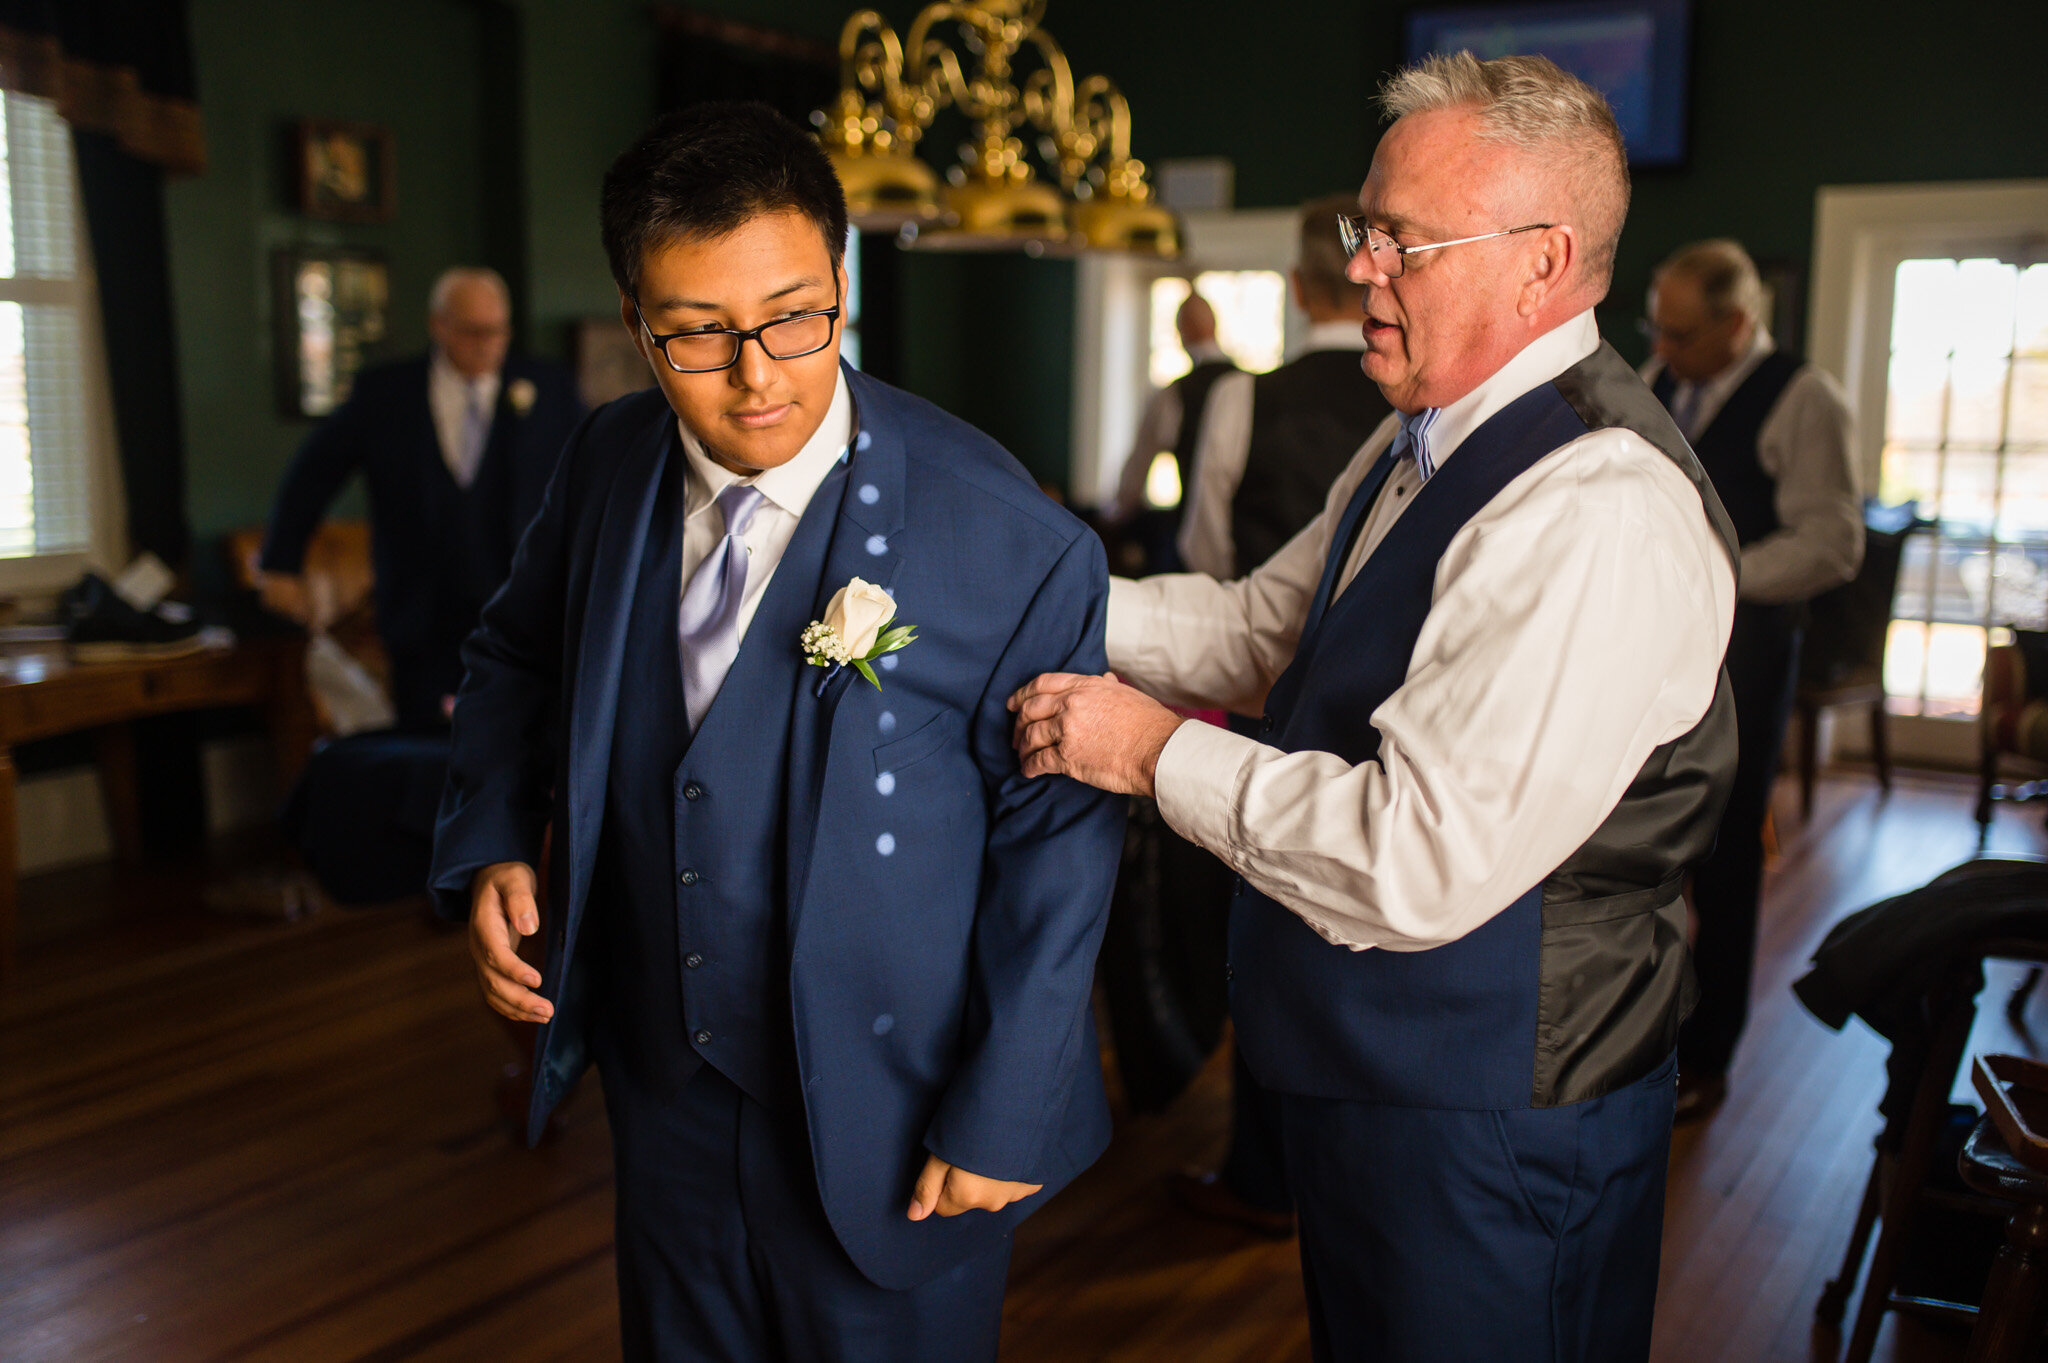 Groom and son helping to put on their suit coats on their wedding day.